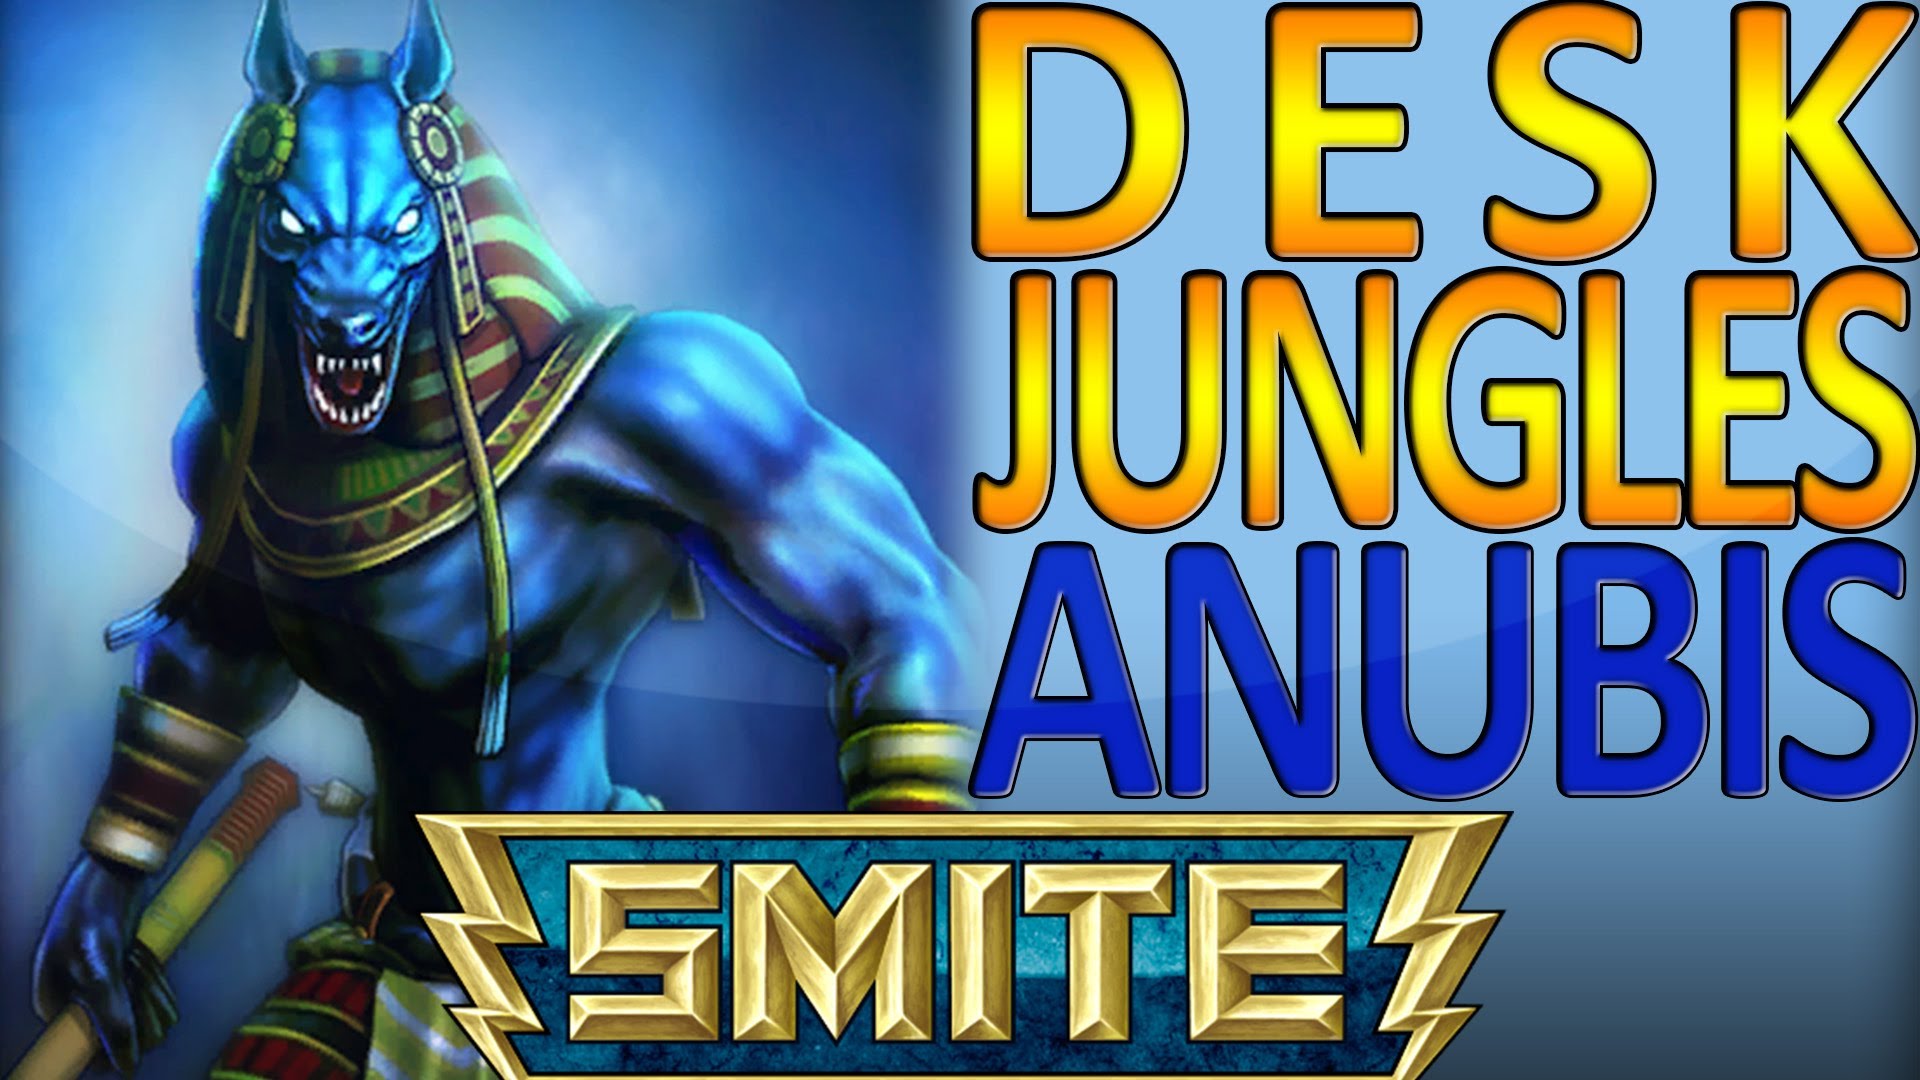 Displaying 19 Images For   Smite Anubis Wallpaper